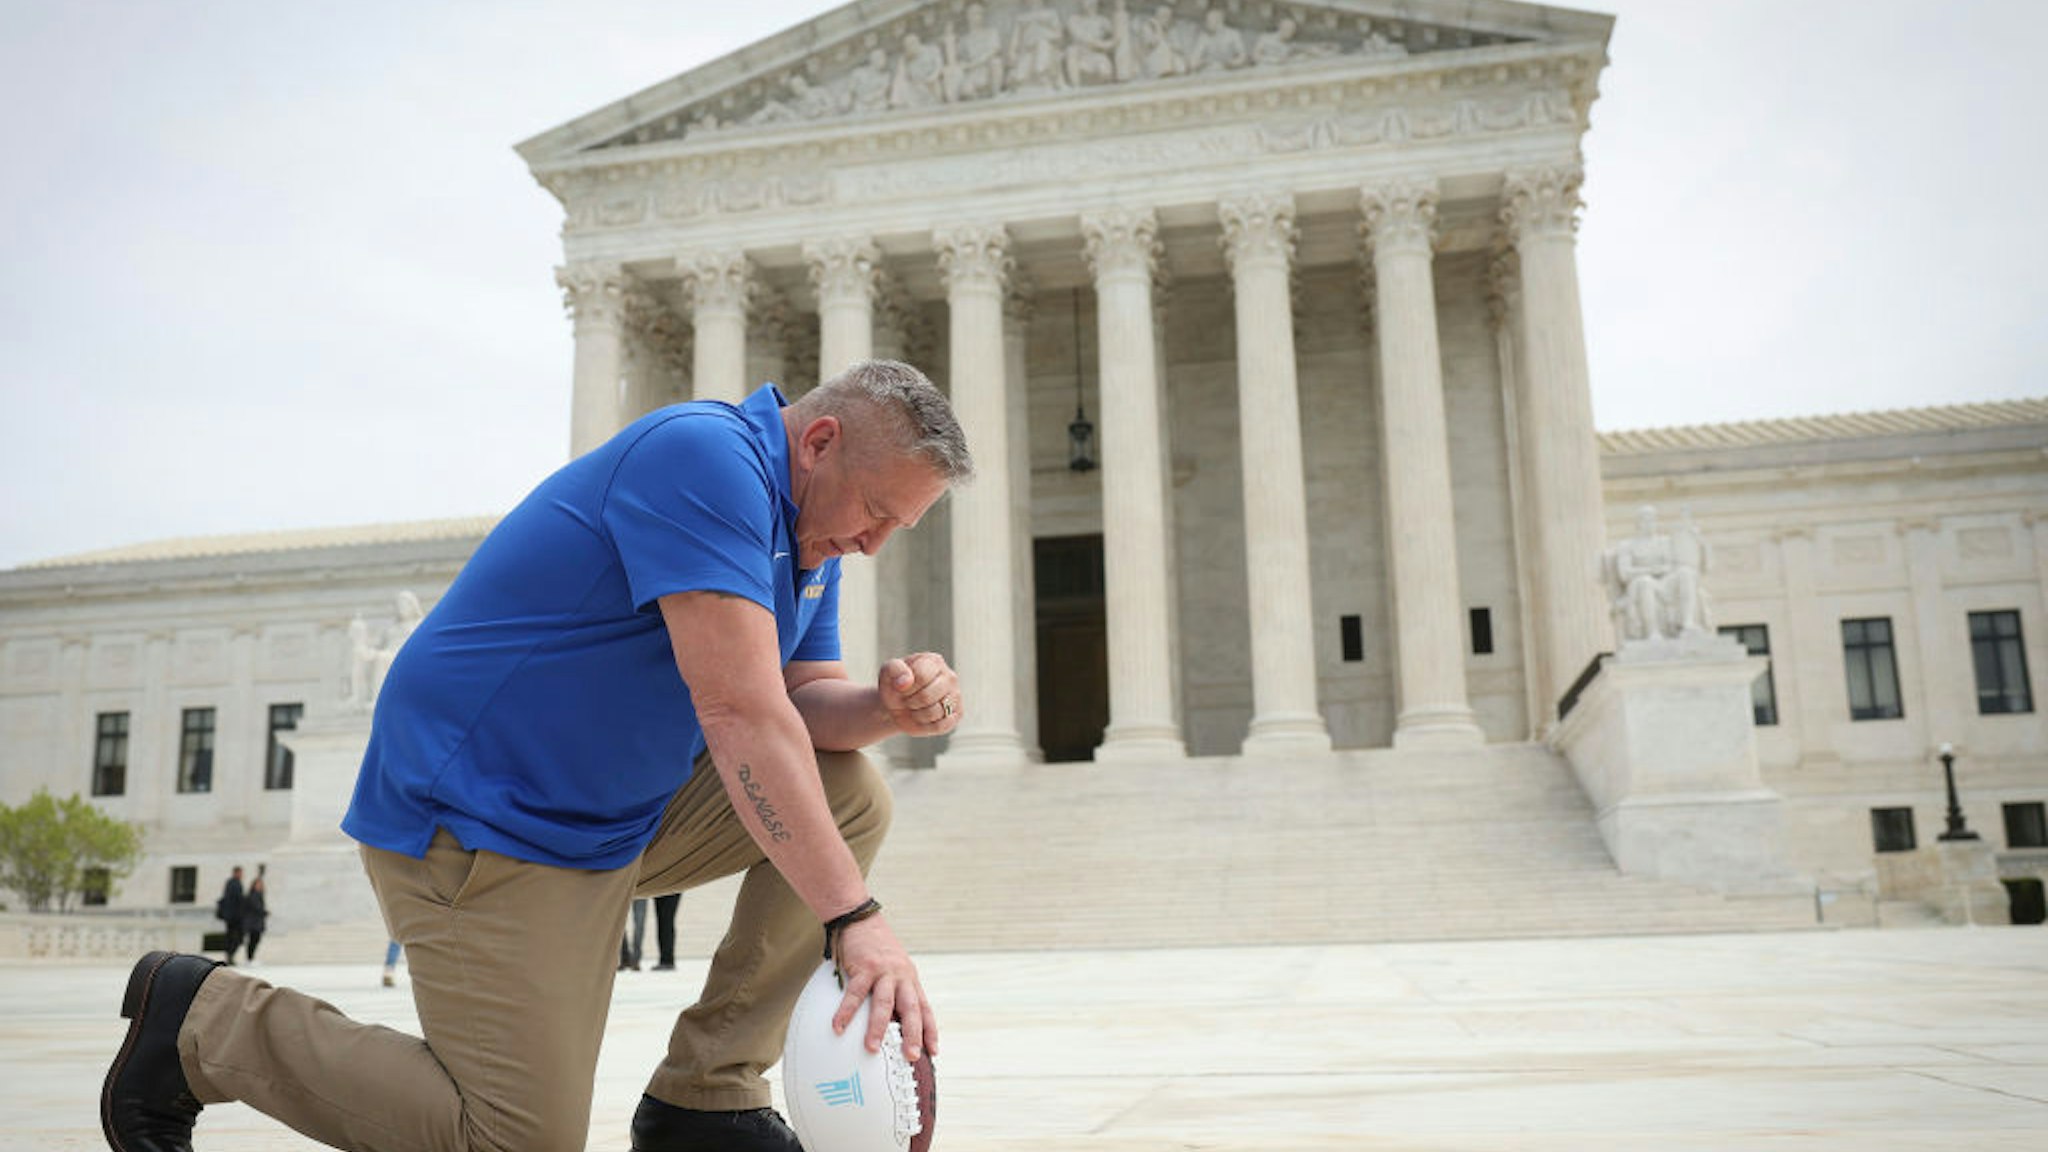 WASHINGTON, DC - APRIL 25: Former Bremerton High School assistant football coach Joe Kennedy takes a knee in front of the U.S. Supreme Court after his legal case, Kennedy vs. Bremerton School District, was argued before the court on April 25, 2022 in Washington, DC. Kennedy was terminated from his job by Bremerton public school officials in 2015 after refusing to stop his on-field prayers after football games.